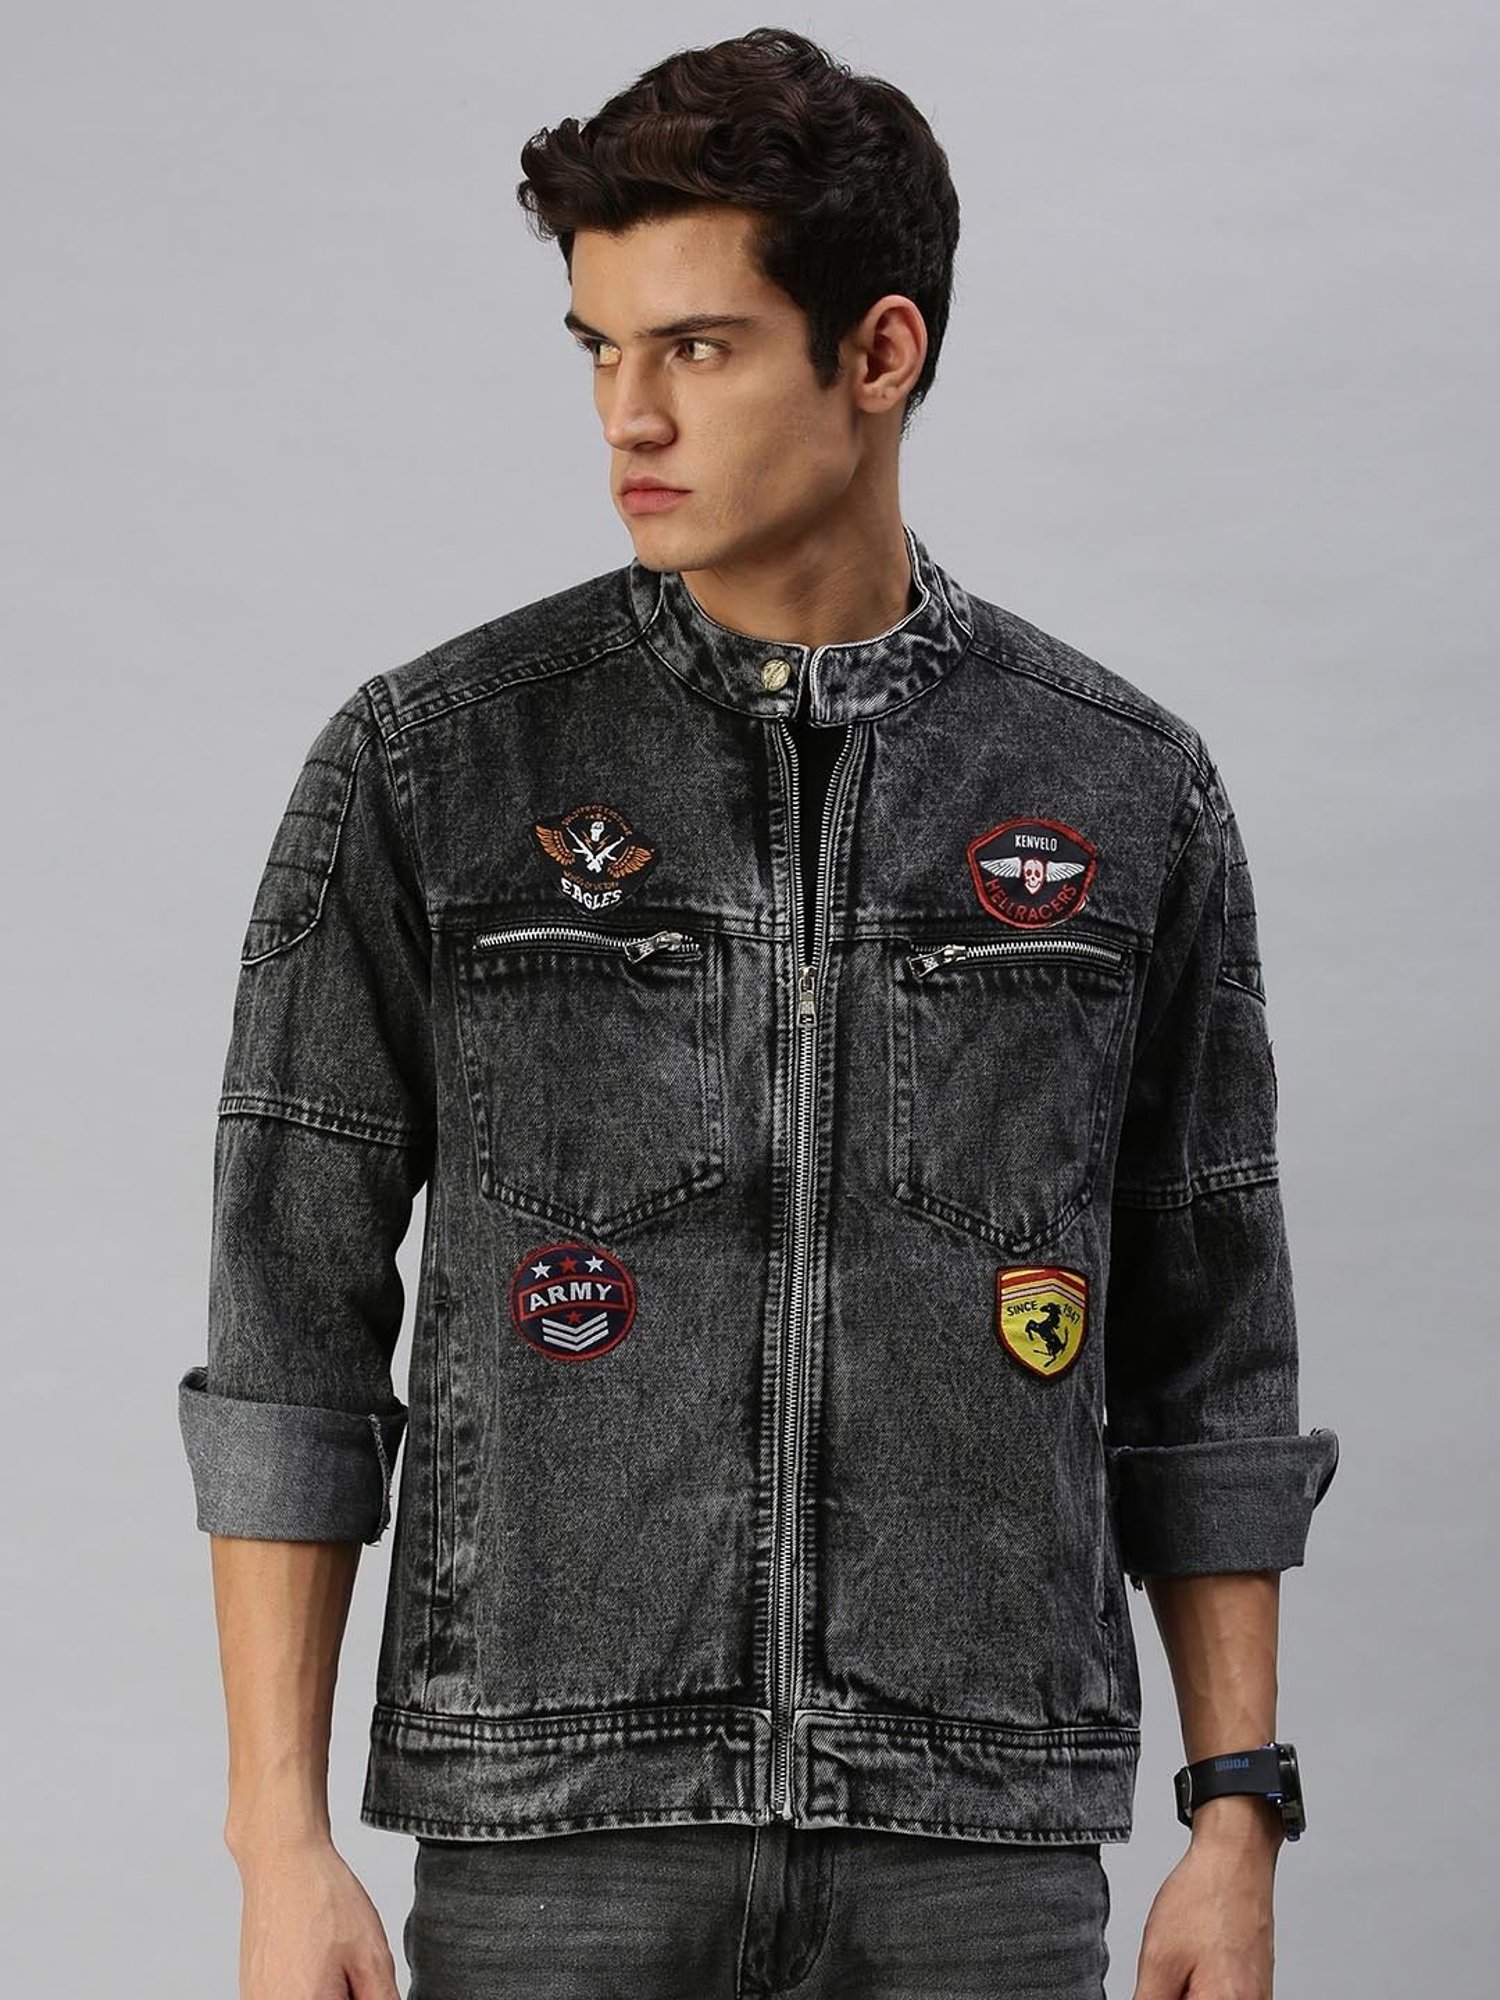 Blue Retro Denim Jacket For Men Casual Cotton Zip Up Jeans Coat For Men  With Stand Collar, Oversized Fit For Boys 3XL 4XL From Dwayverda, $43.75 |  DHgate.Com